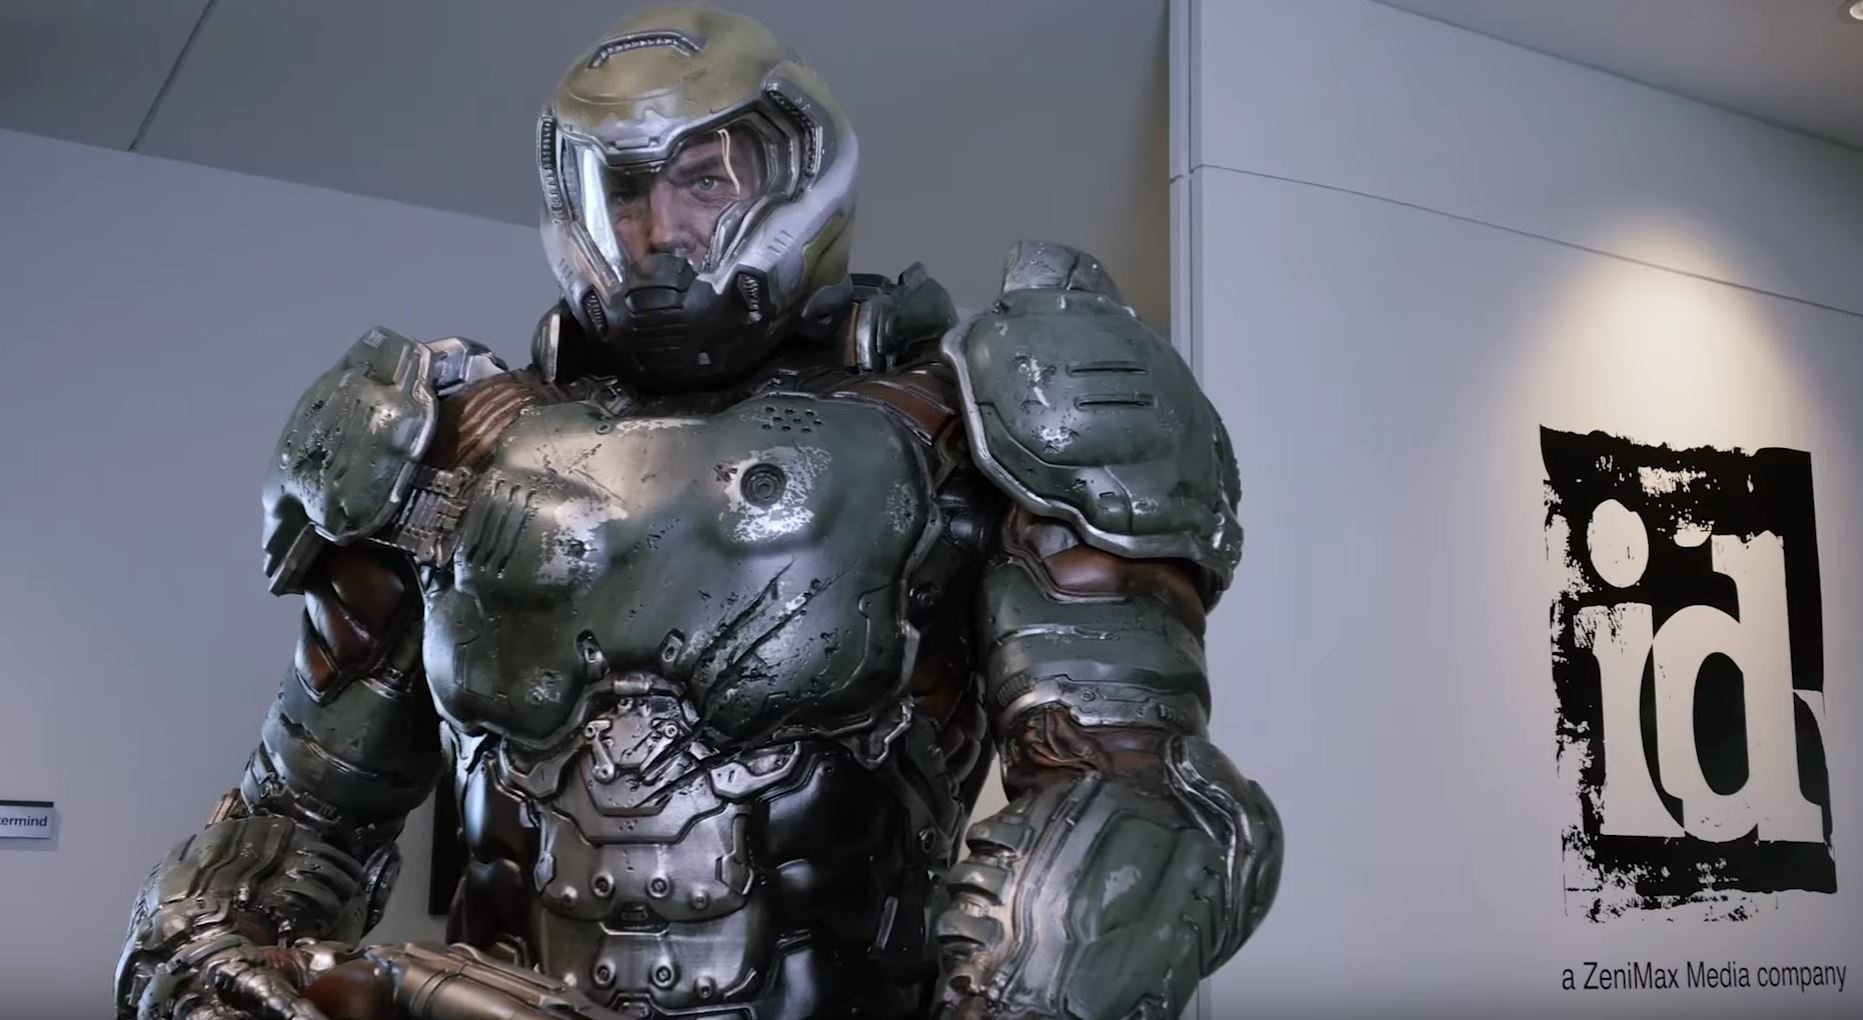 Bethesda Talks 'Fallout 4,' 'Dishonored 2,' 'Quake' And More